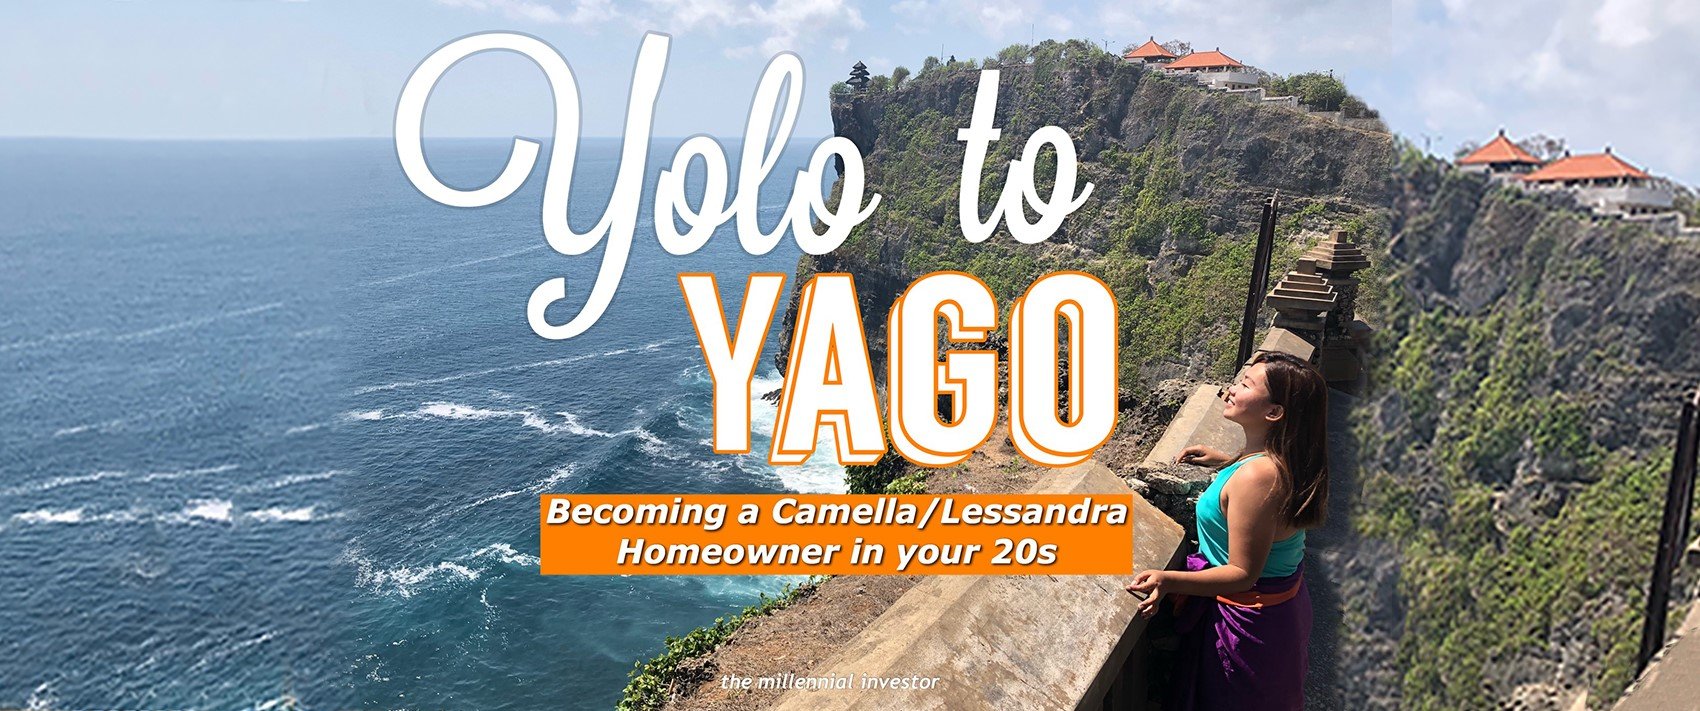 yolo to yago featured image